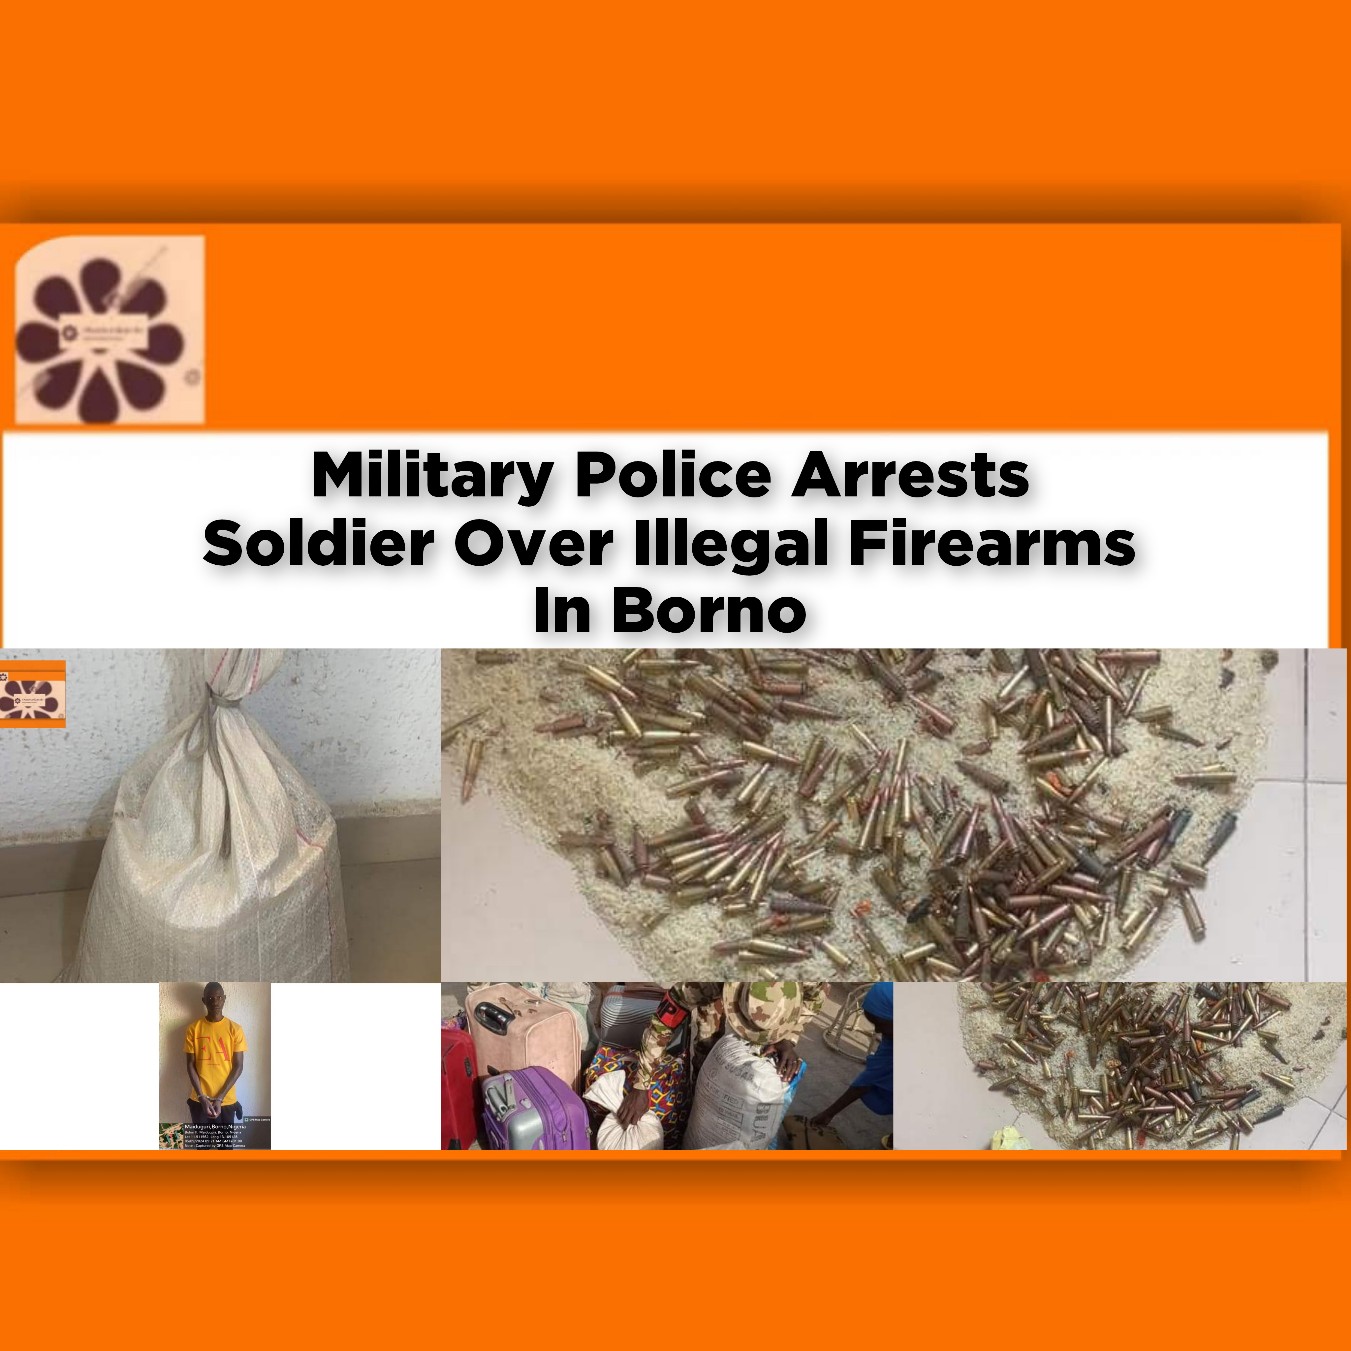 Military Police Arrests Soldier Over Illegal Firearms In Borno ~ OsazuwaAkonedo #Islamabad